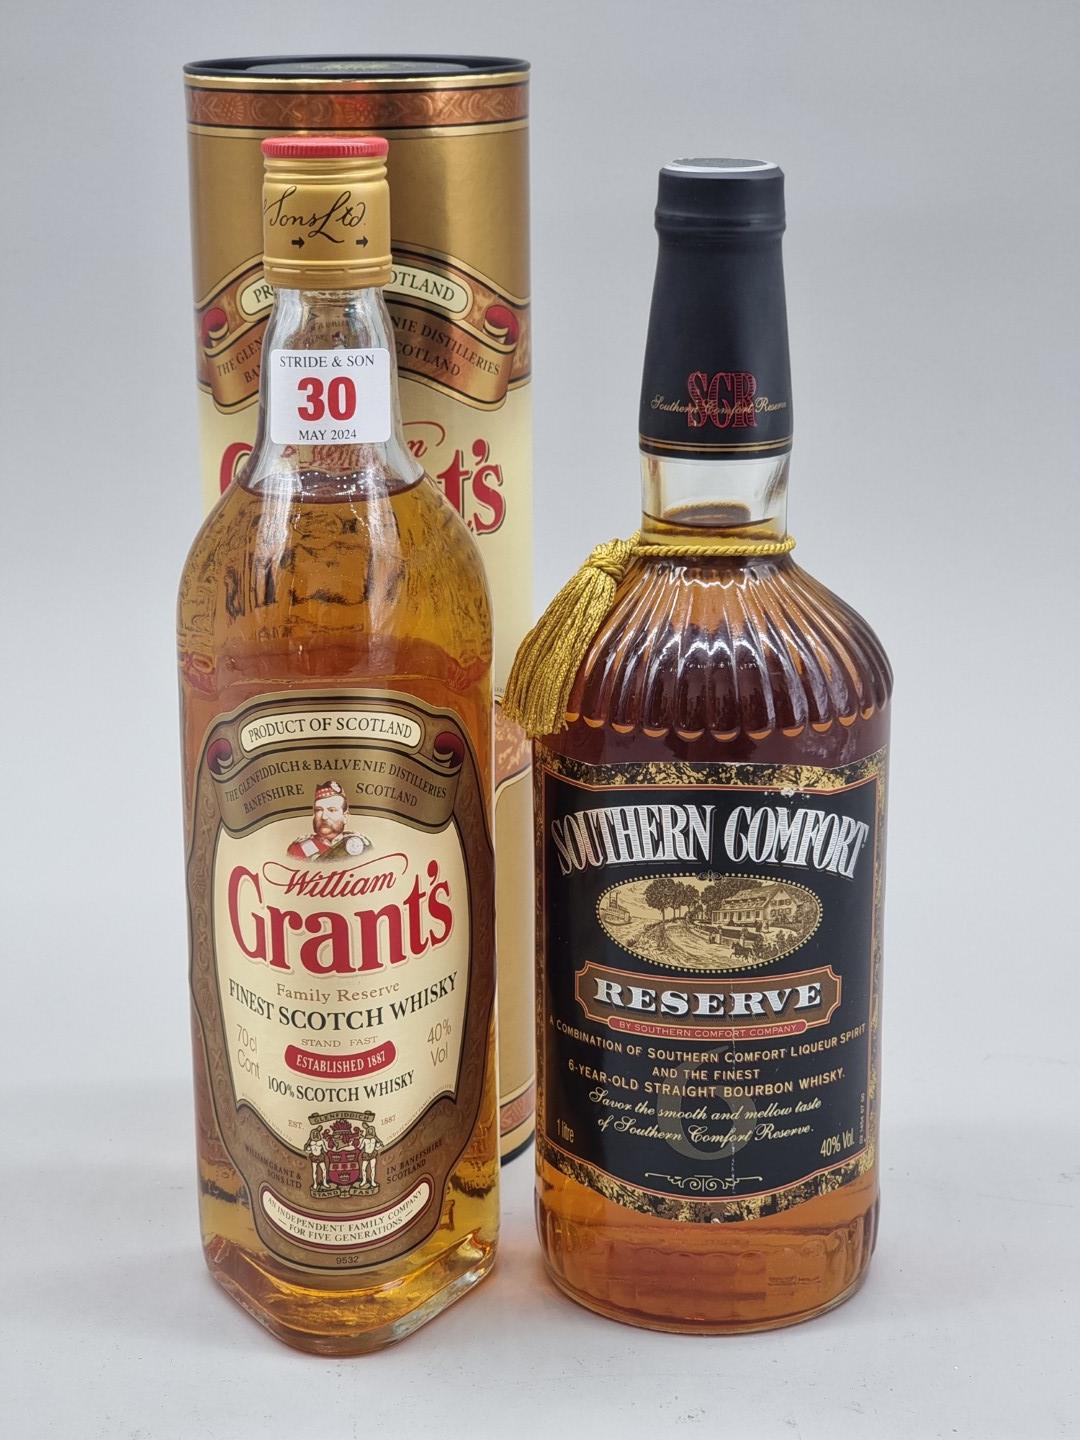 A 1 litre bottle of Southern Comfort 'Reserve'; together with a 70cl bottle of Grant's blended